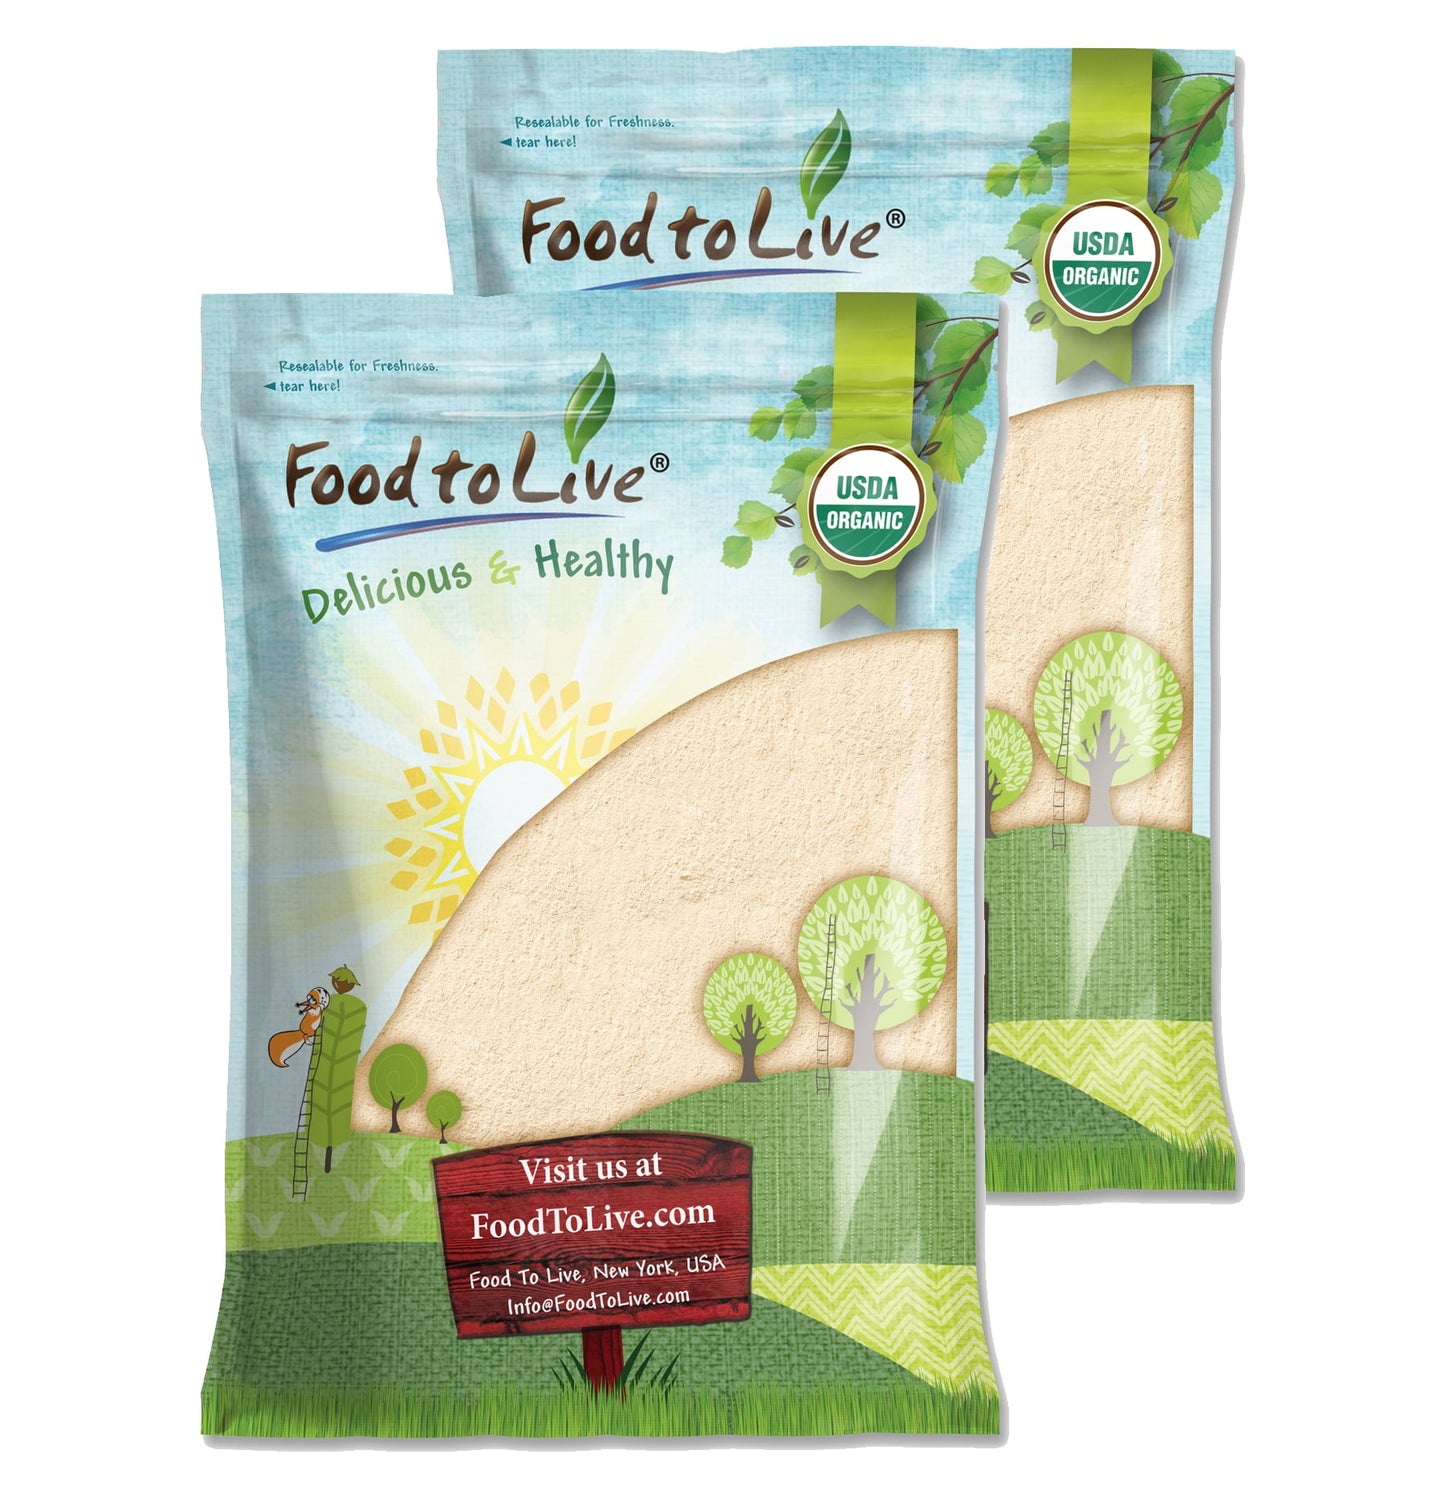 Organic Green Banana Powder - Non-GMO, Whole Fruit Flour, Finely Ground, Pure, No Sugar Added, Unsulfured, Vegan, Bulk. Good Source of Resistant Starch and Prebiotic Fiber. Great for Baking